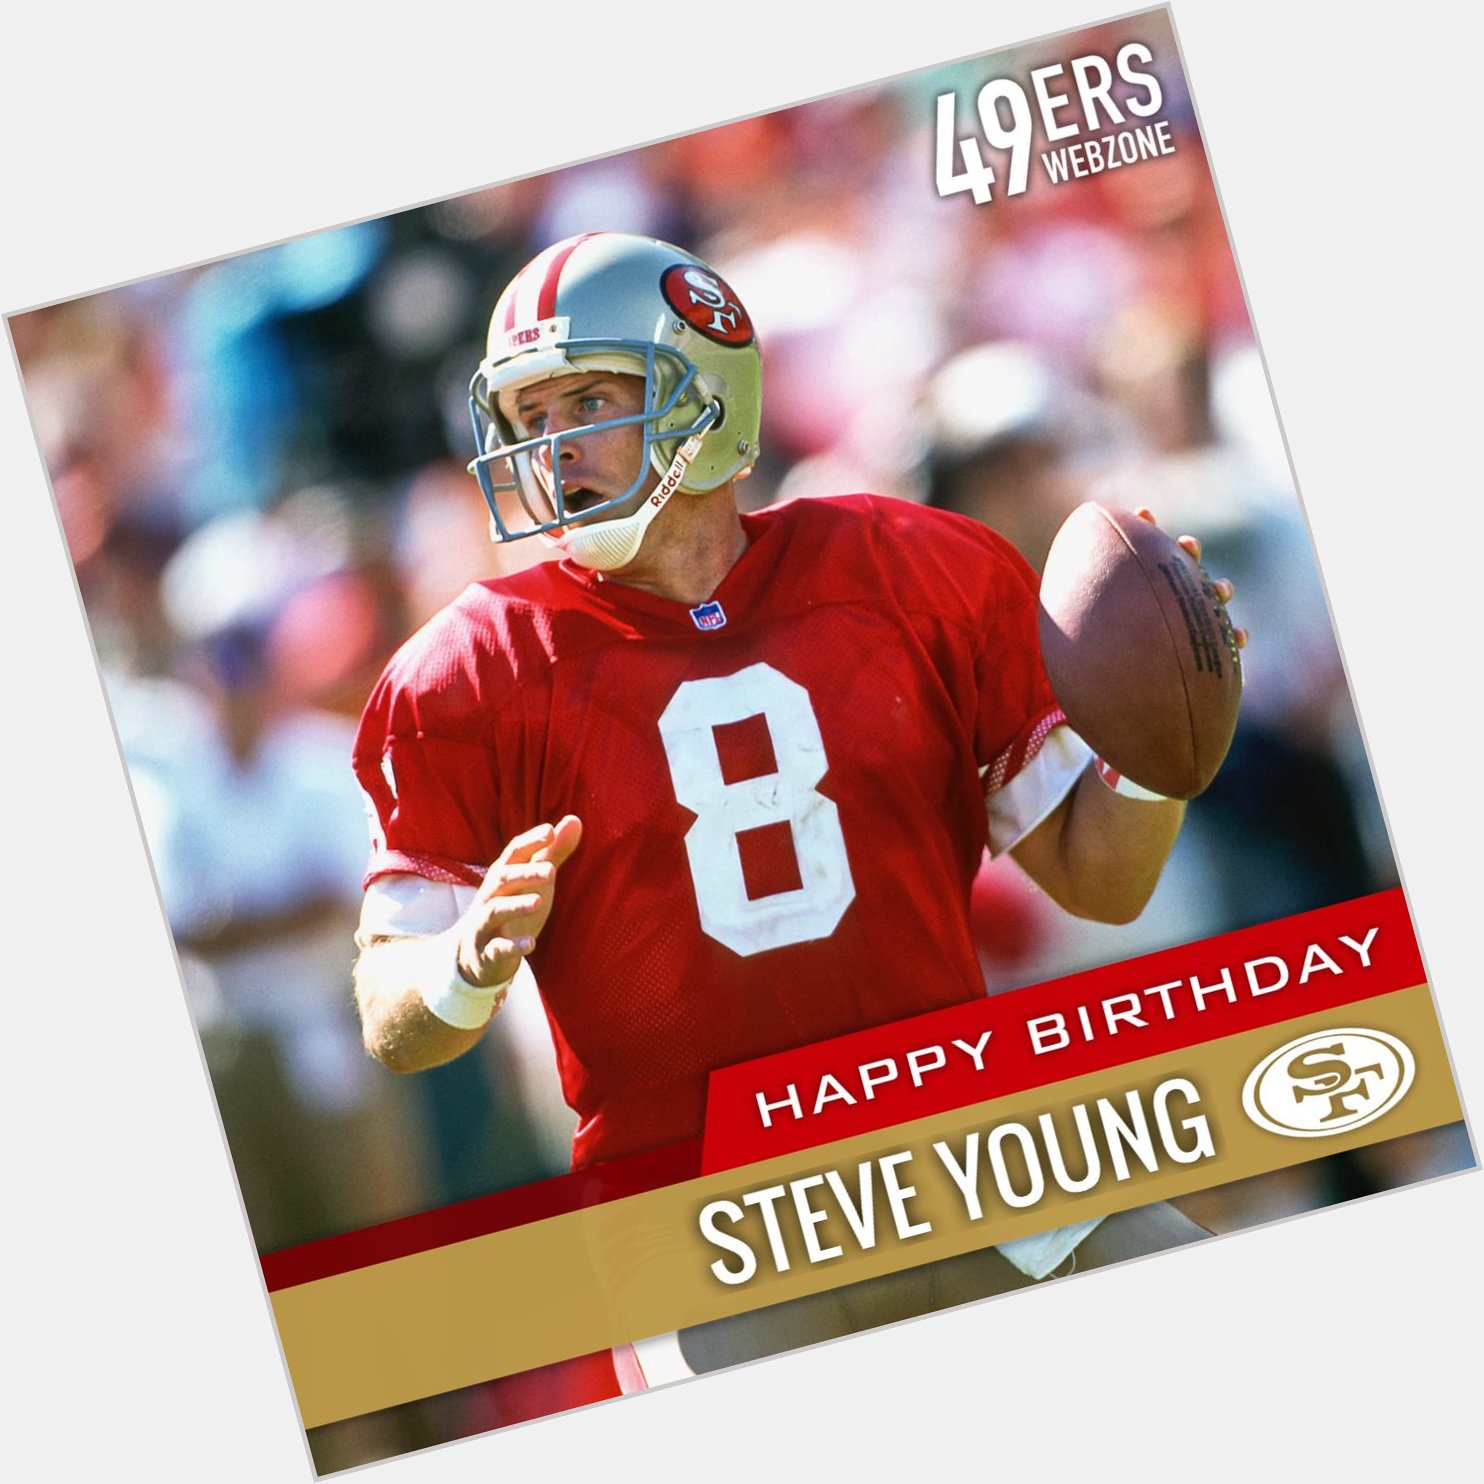 Happy birthday to Hall of Fame quarterback Steve Young! 